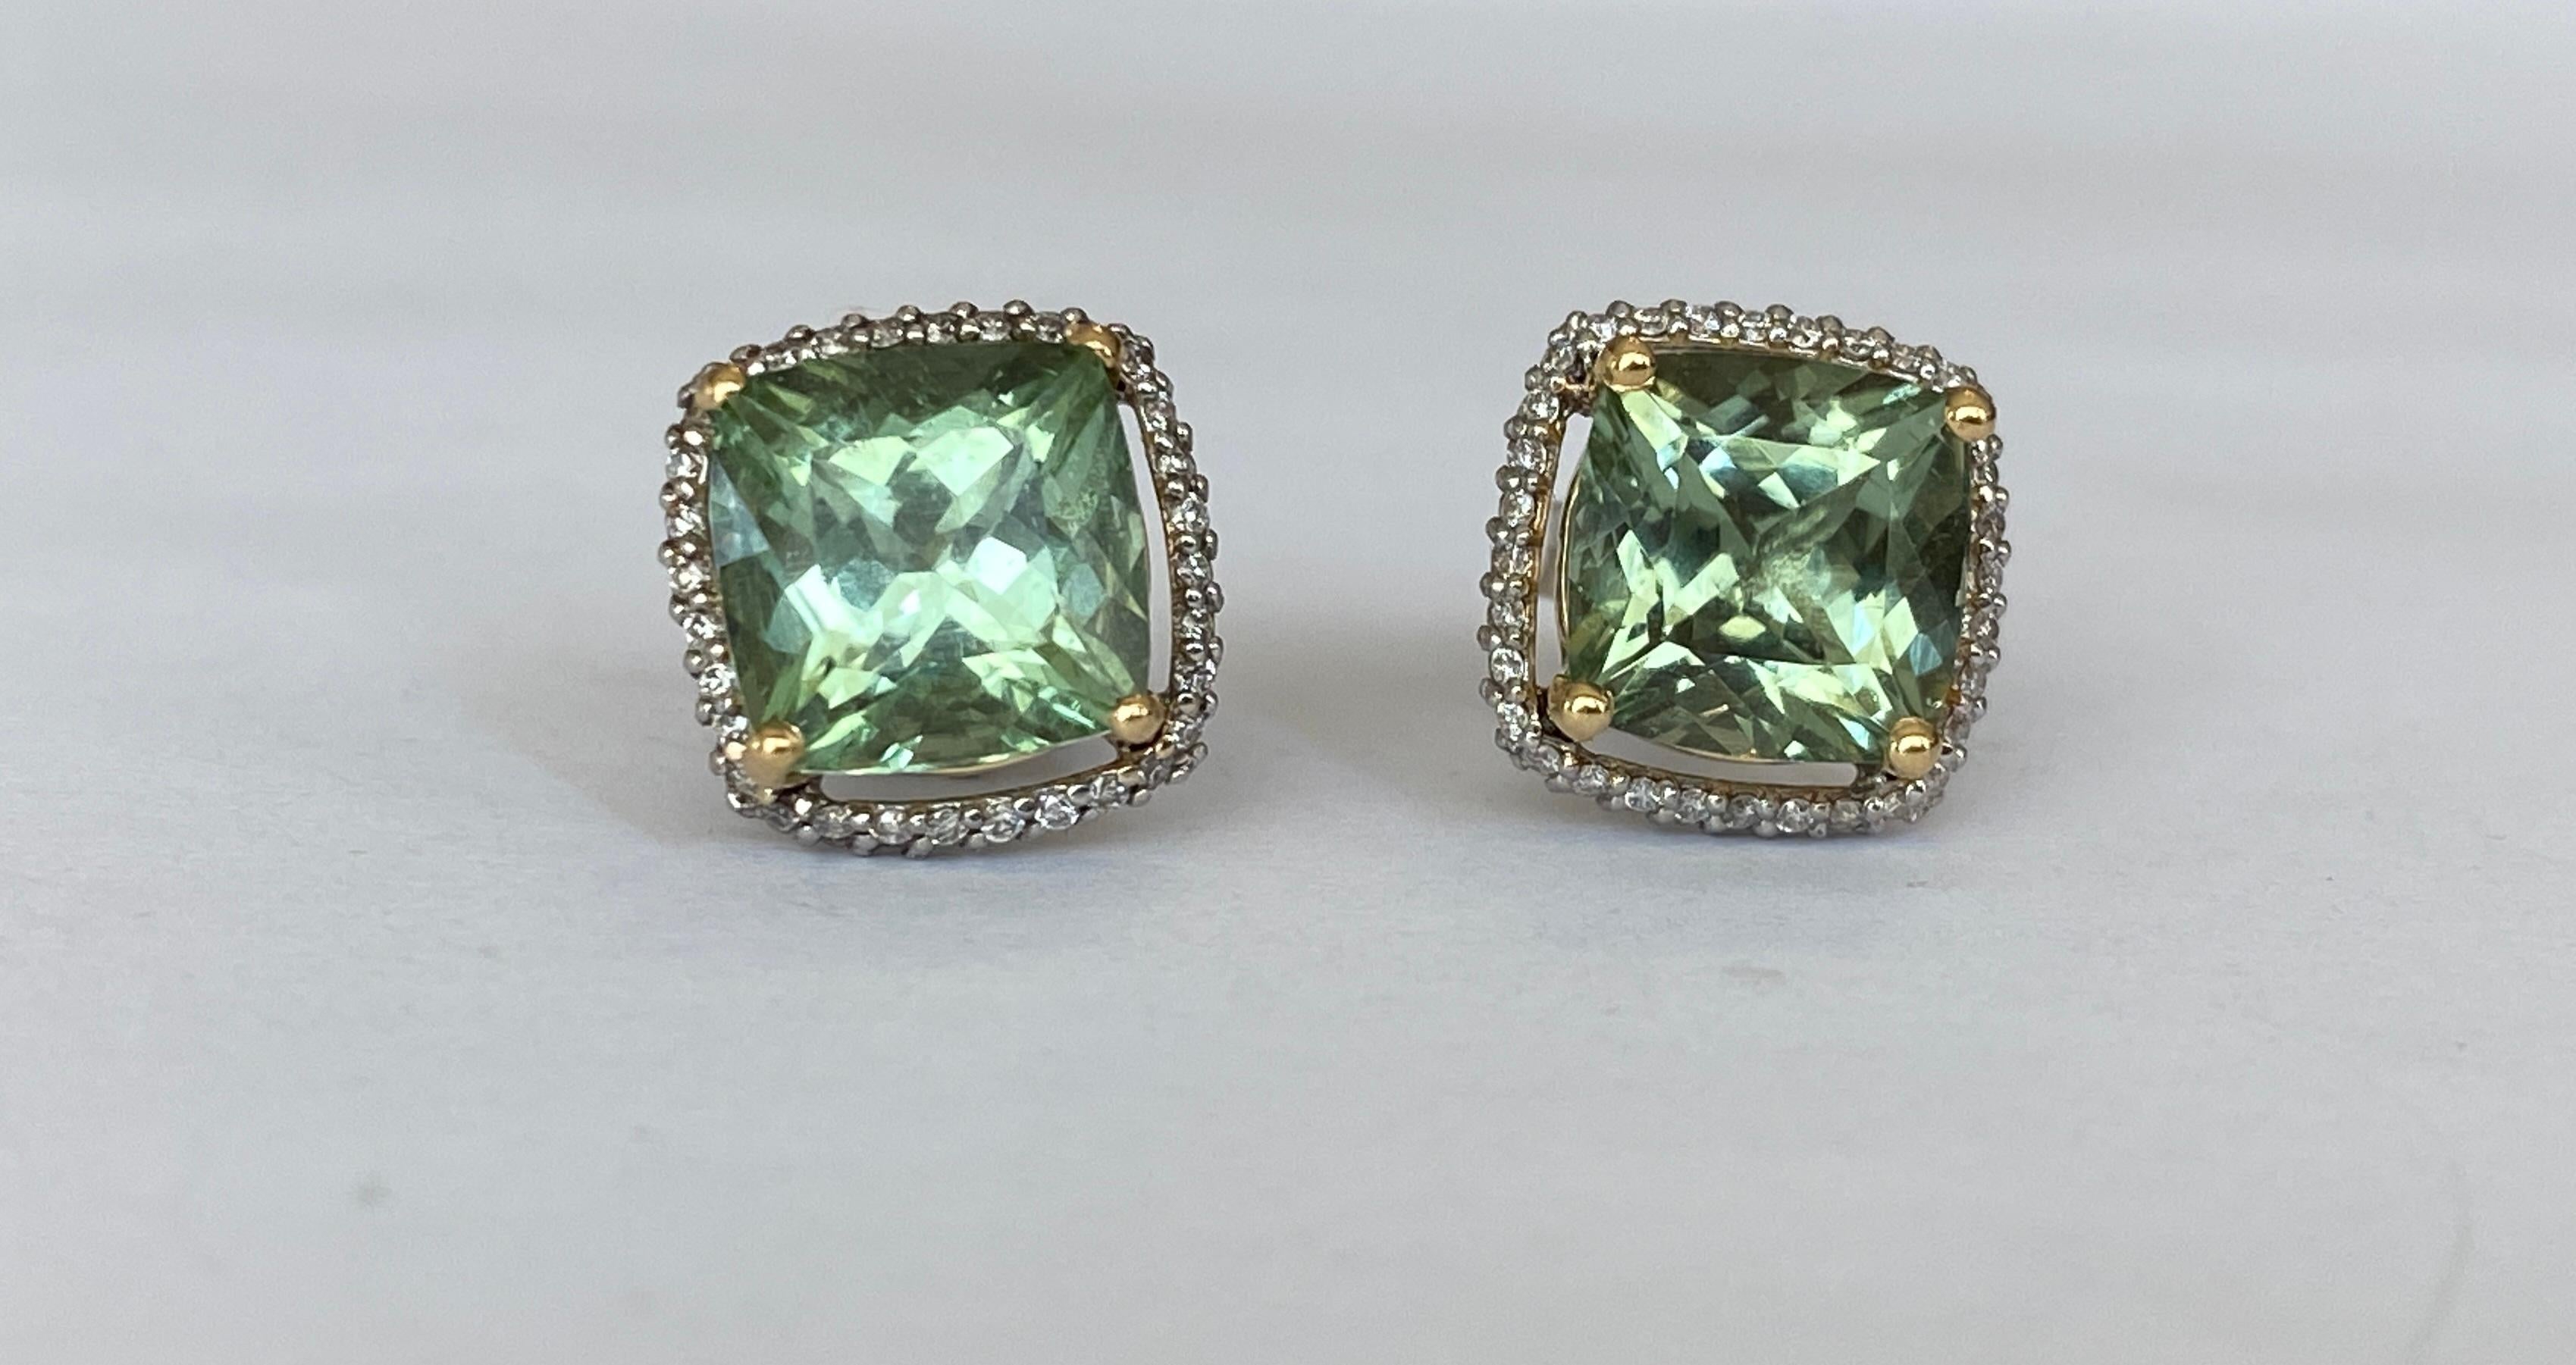 Offered ear studs in white gold and yellow gold details, with two pieces of Cushion  cut Green Tourmaline approx. 5.00 carat together. The stones are surrounded by an entourage of 128 stuks  brilliant cut diamonds, approx. 0.45 ct in total, of